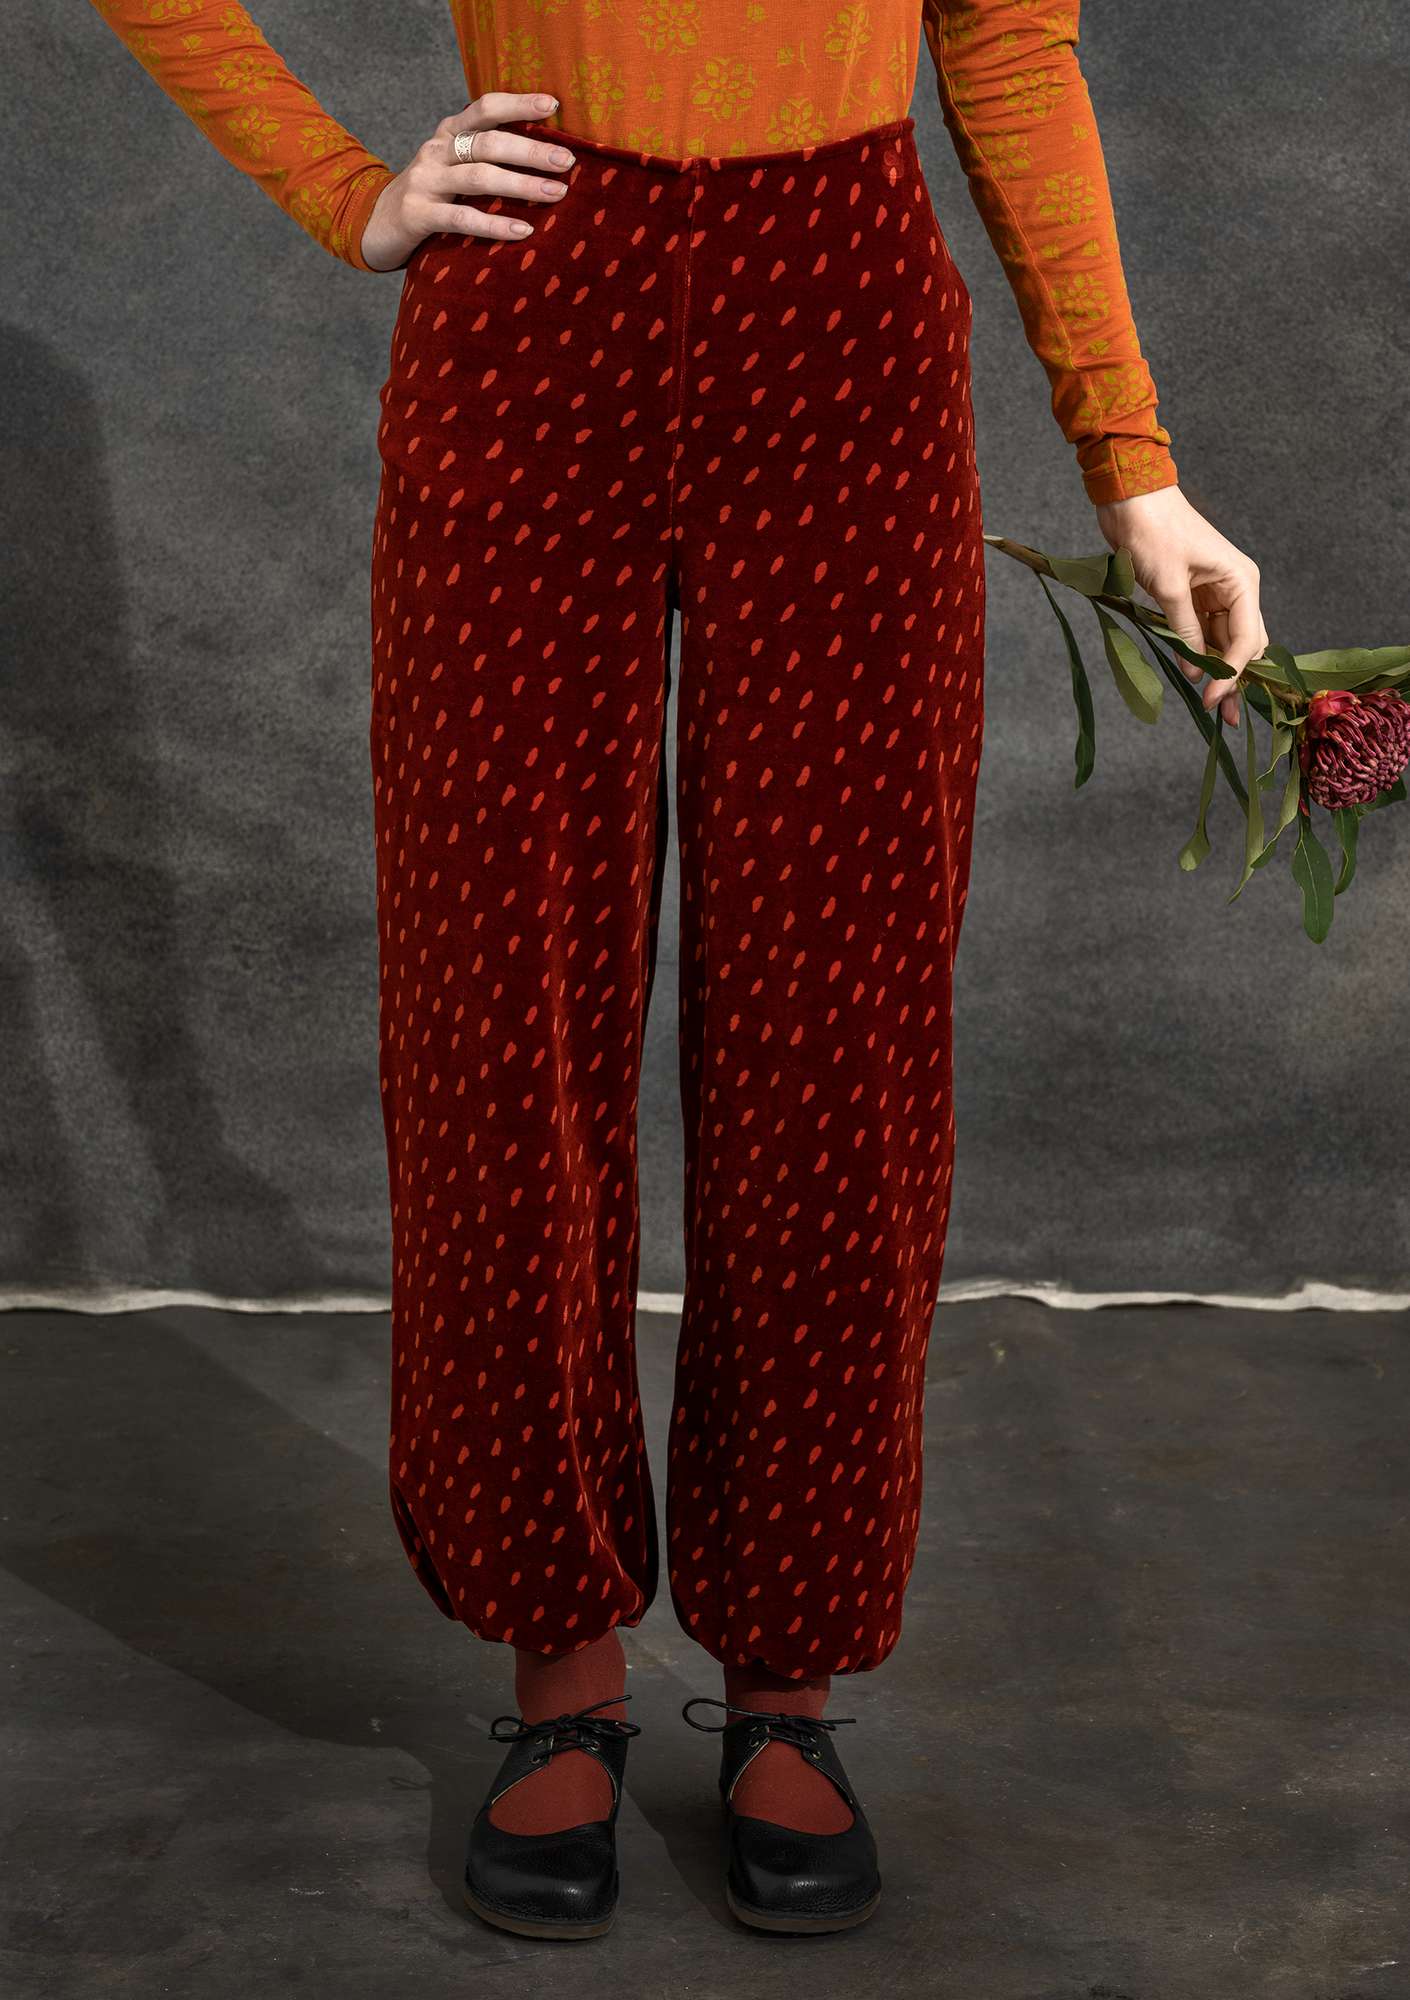 “Fauna” velour trousers in organic cotton/recycled polyester chili/patterned thumbnail